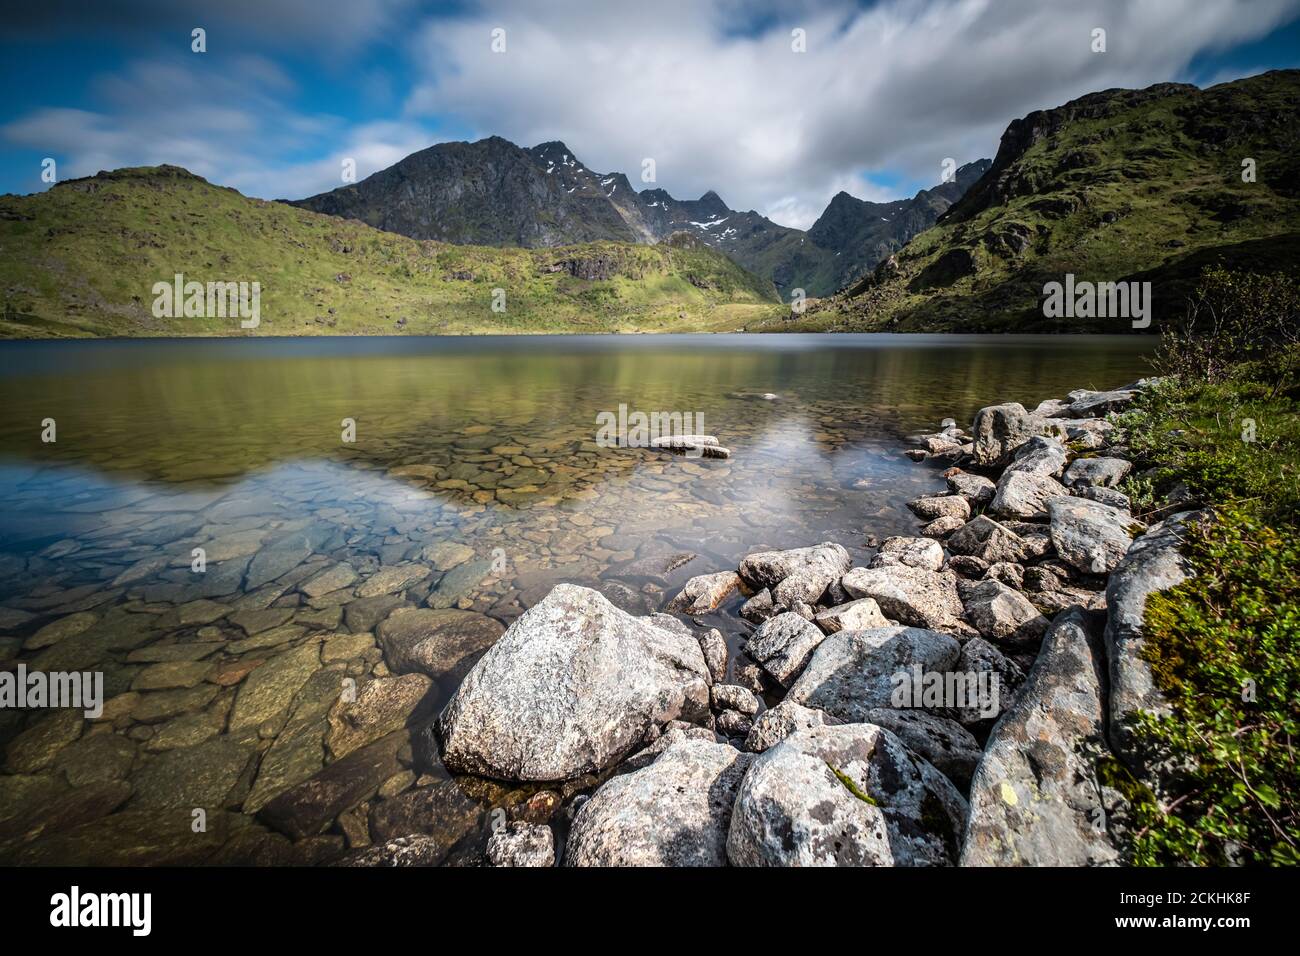 One of the lakes between the Haukland beach and the Leknes sity during a sunny day on Lofoten islands, Norway Stock Photo